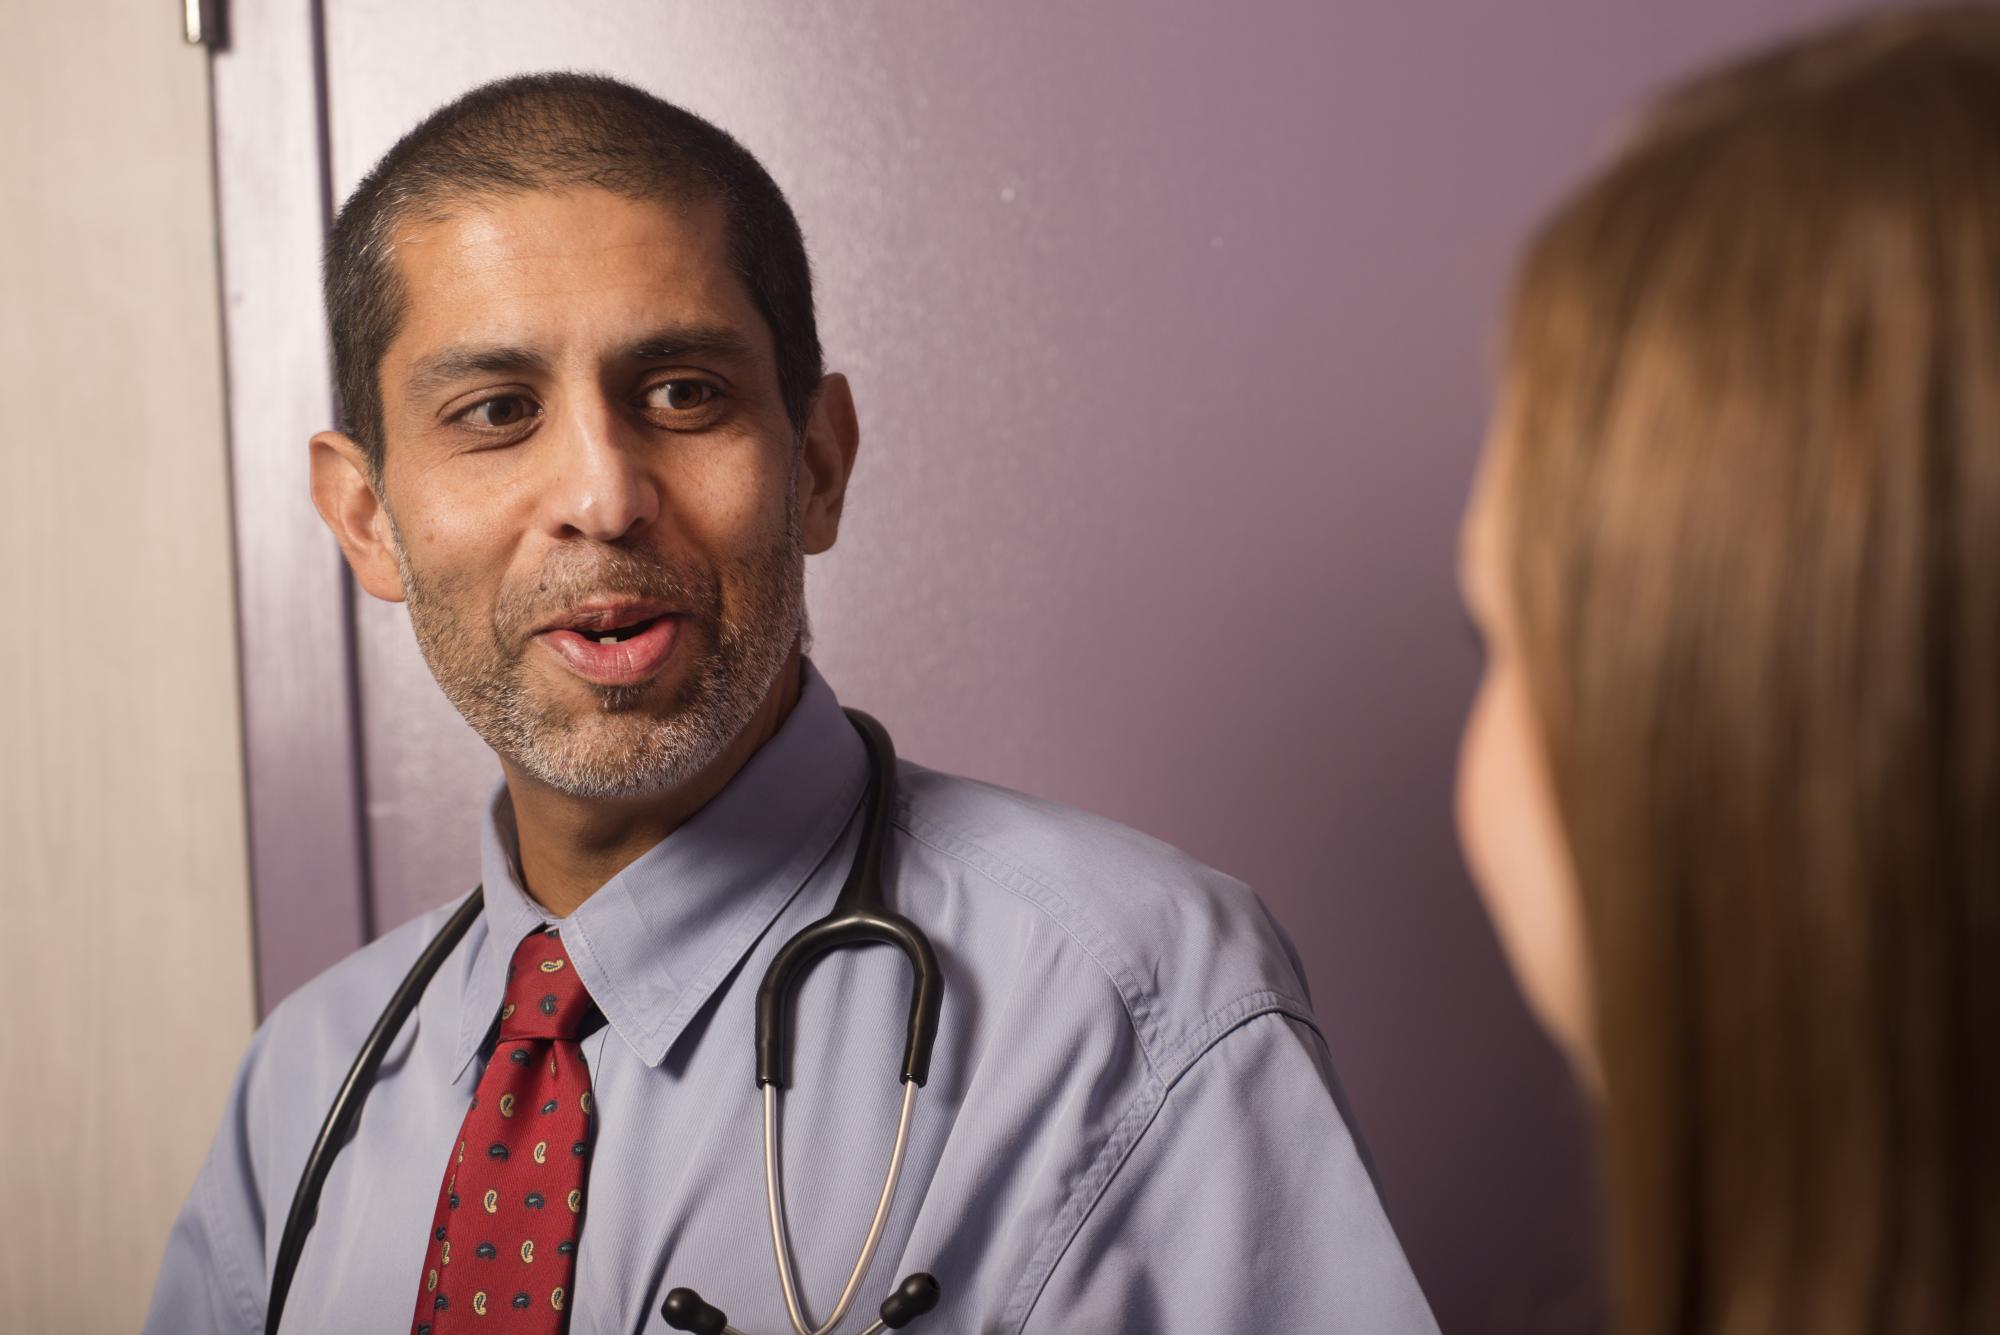 A male doctor talks with a patient